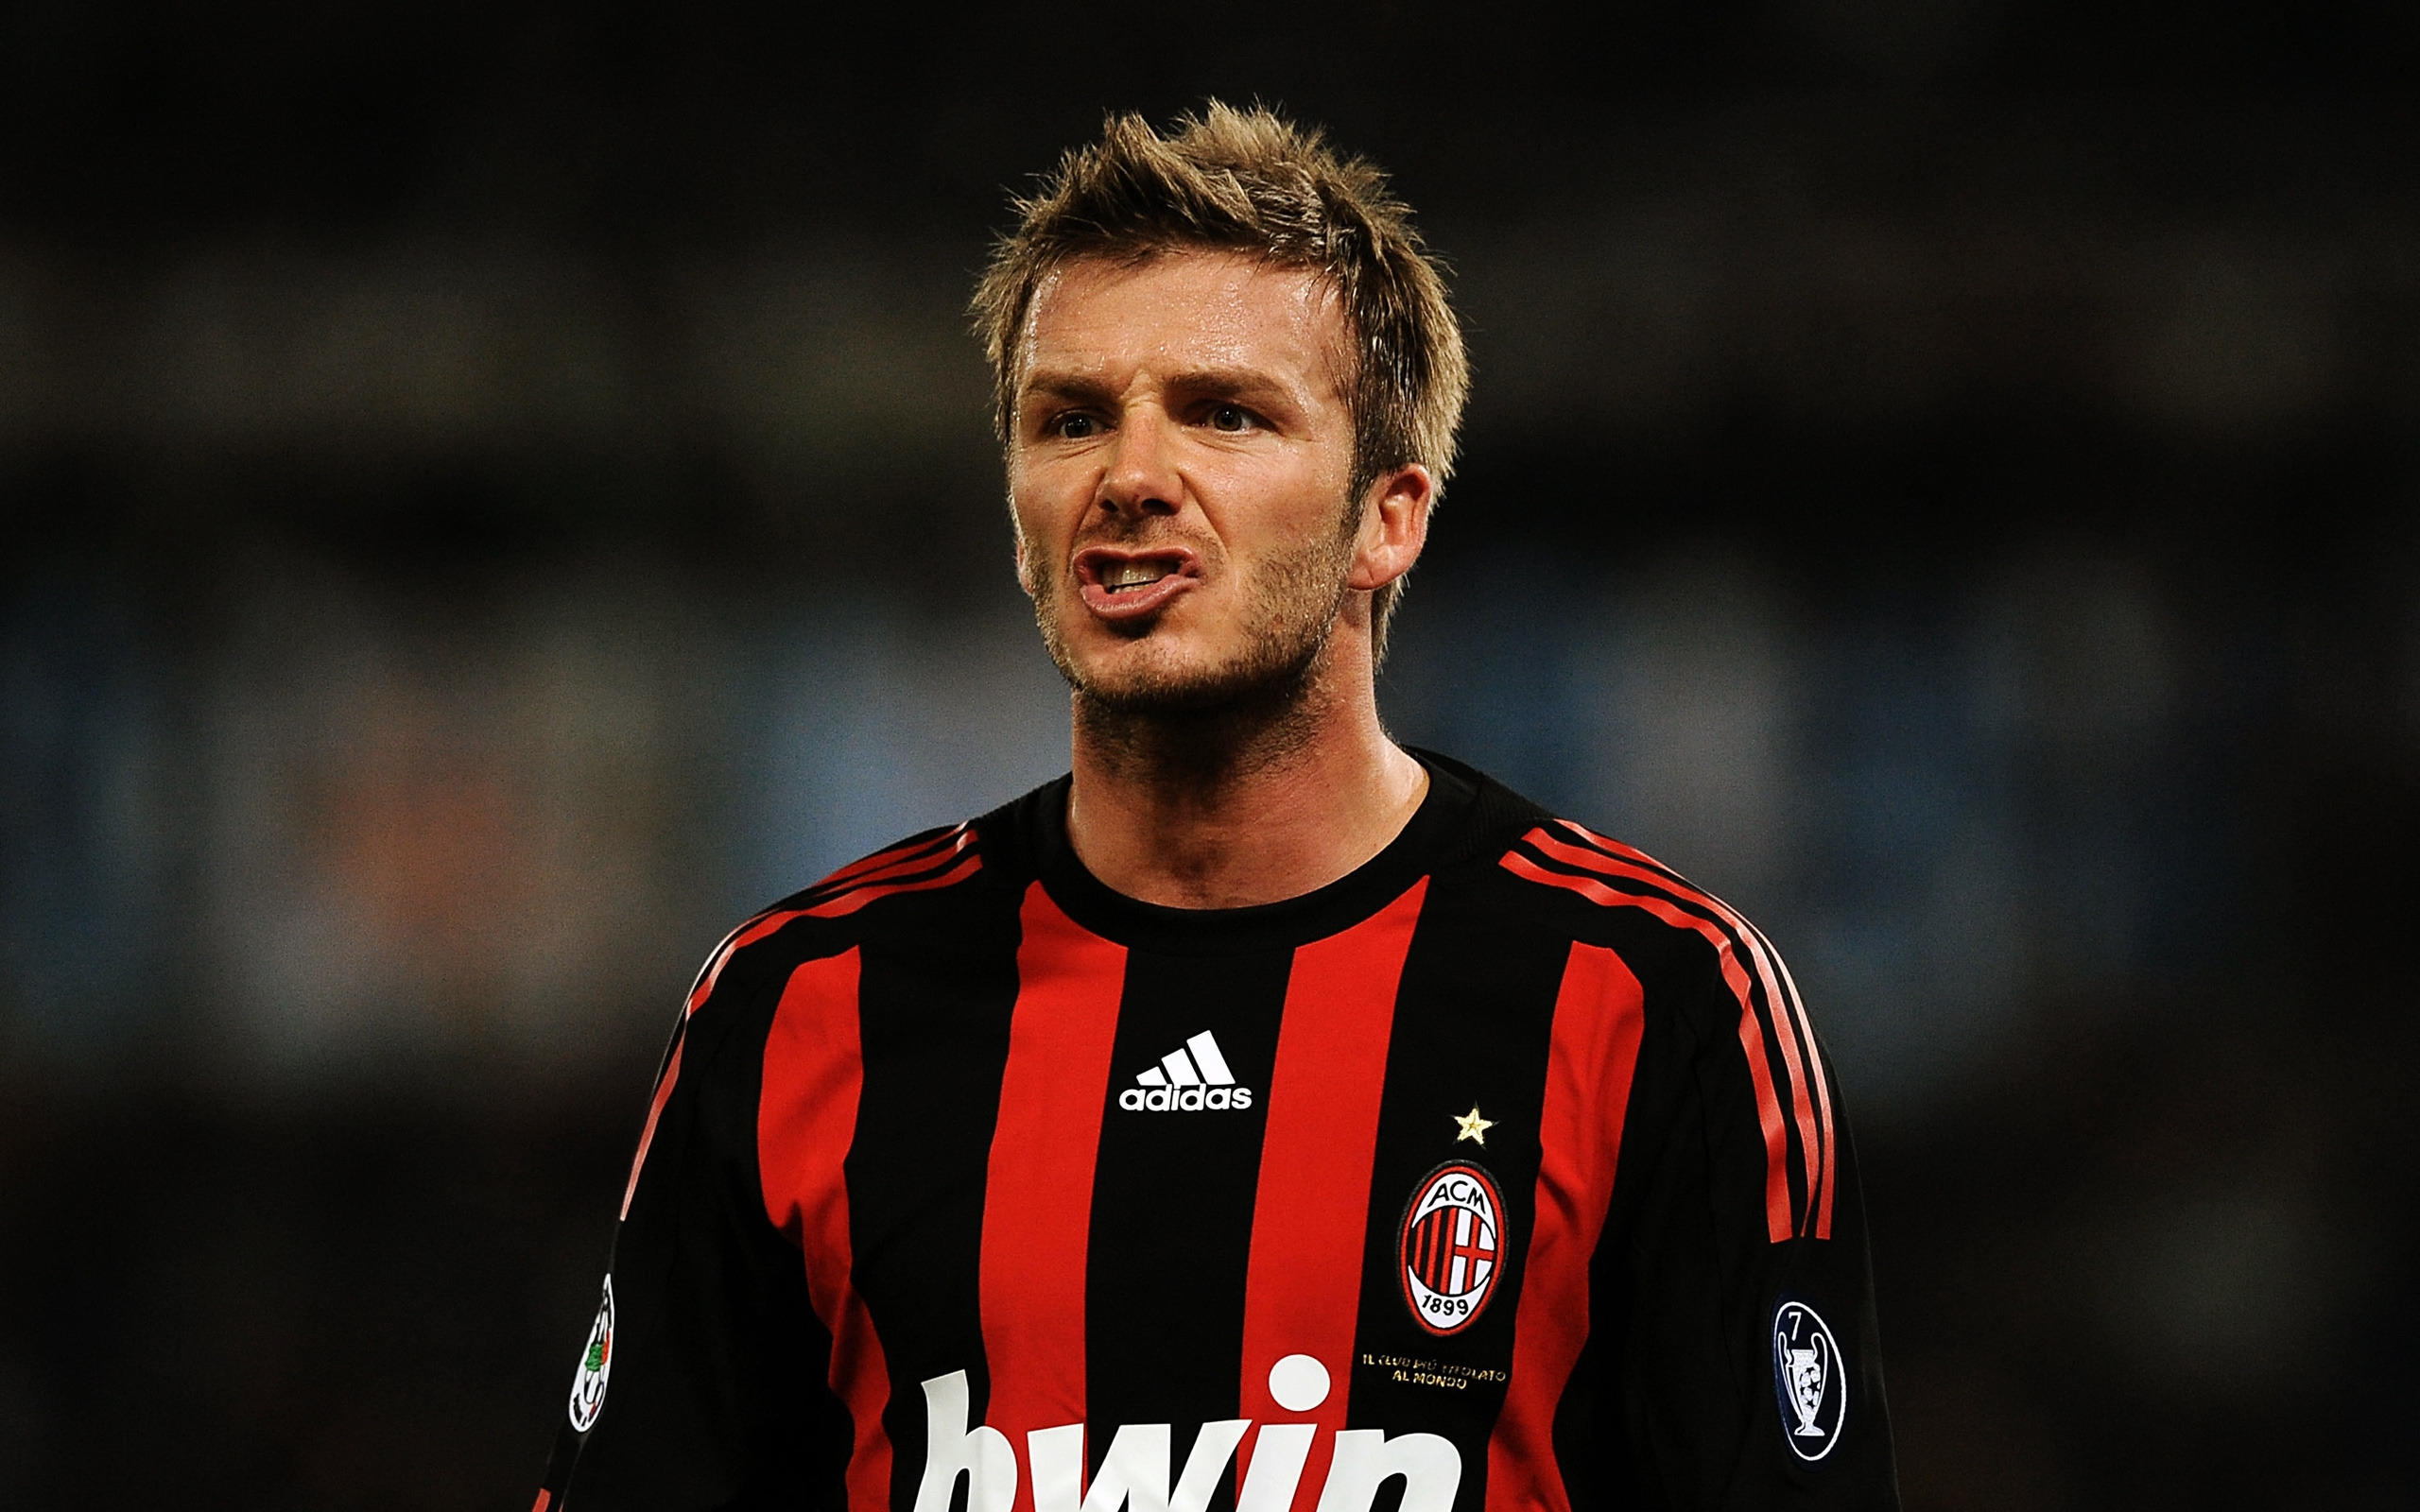 Angry David Beckham for 2560 x 1600 widescreen resolution